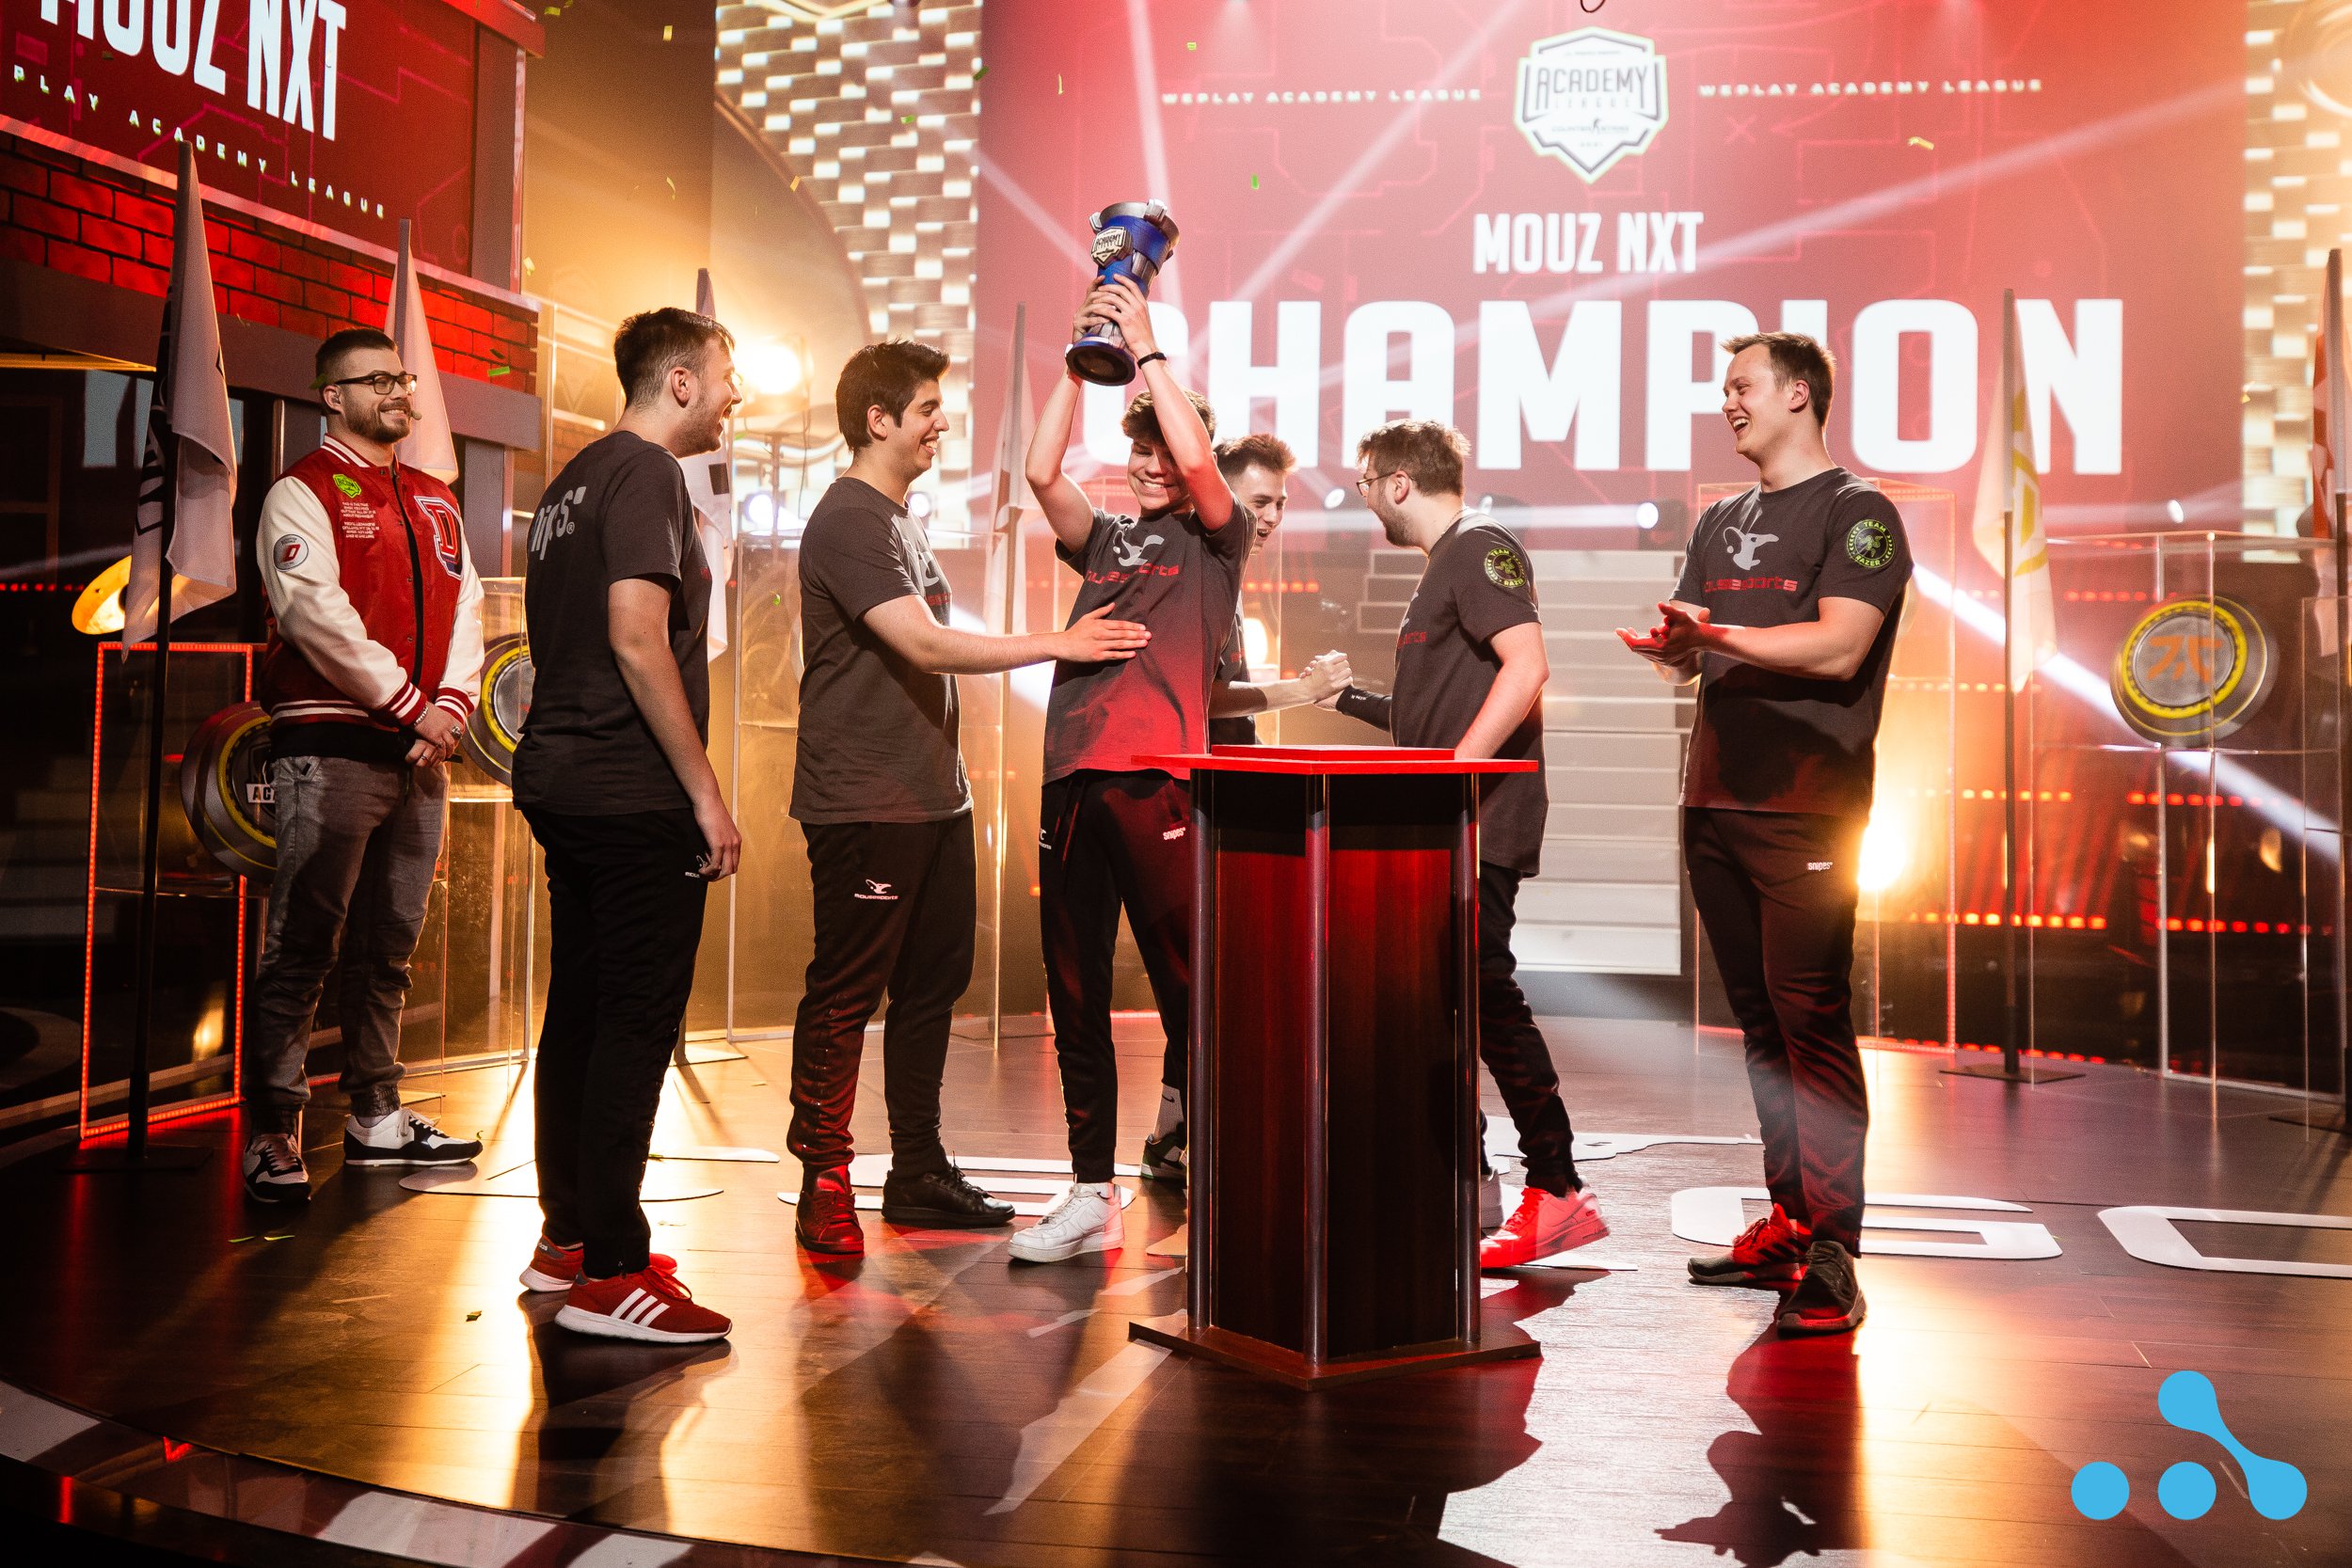 MOUZ NXT will try to defend their title at WePlay Academy League Season 3 Finals